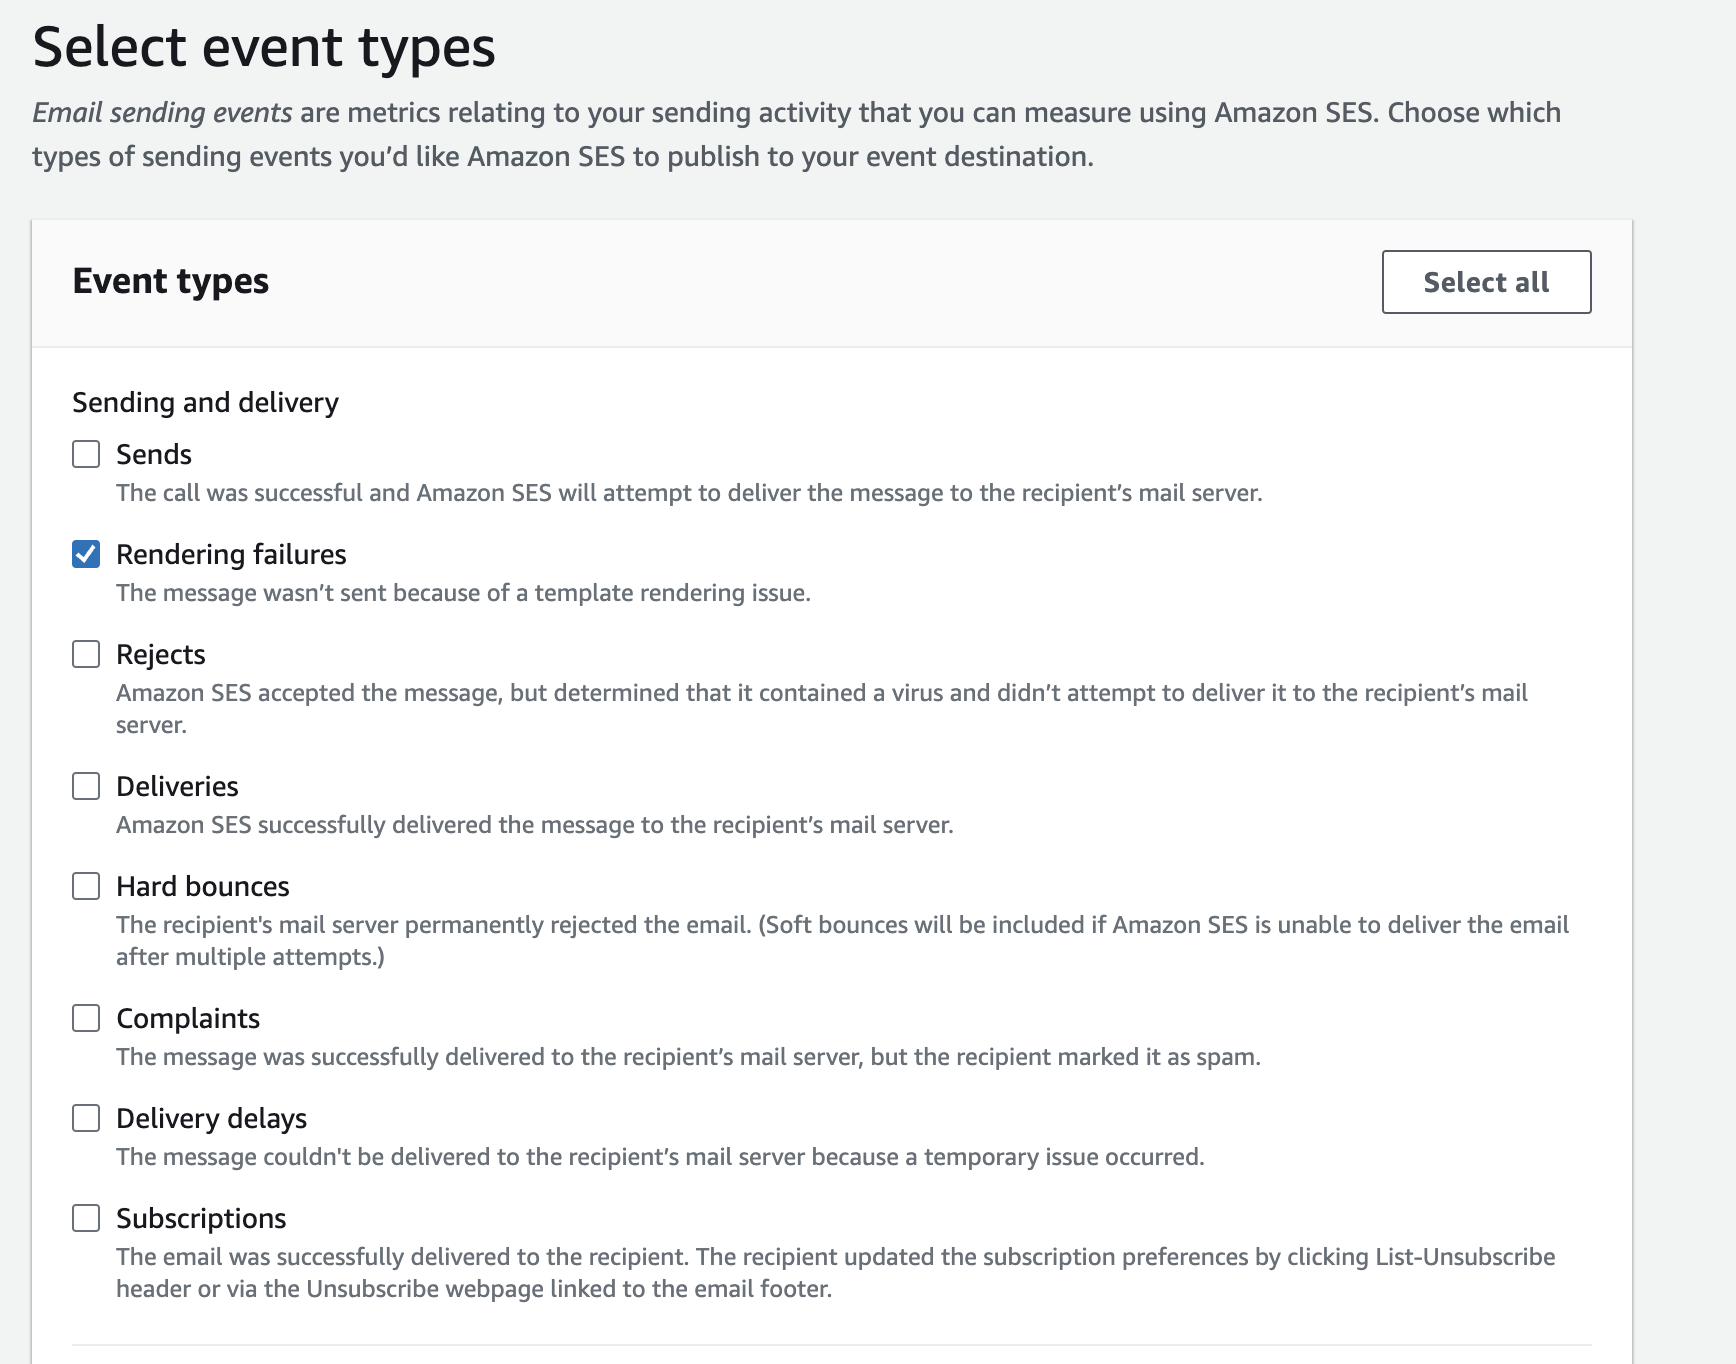 AWS Console view of selecting event types